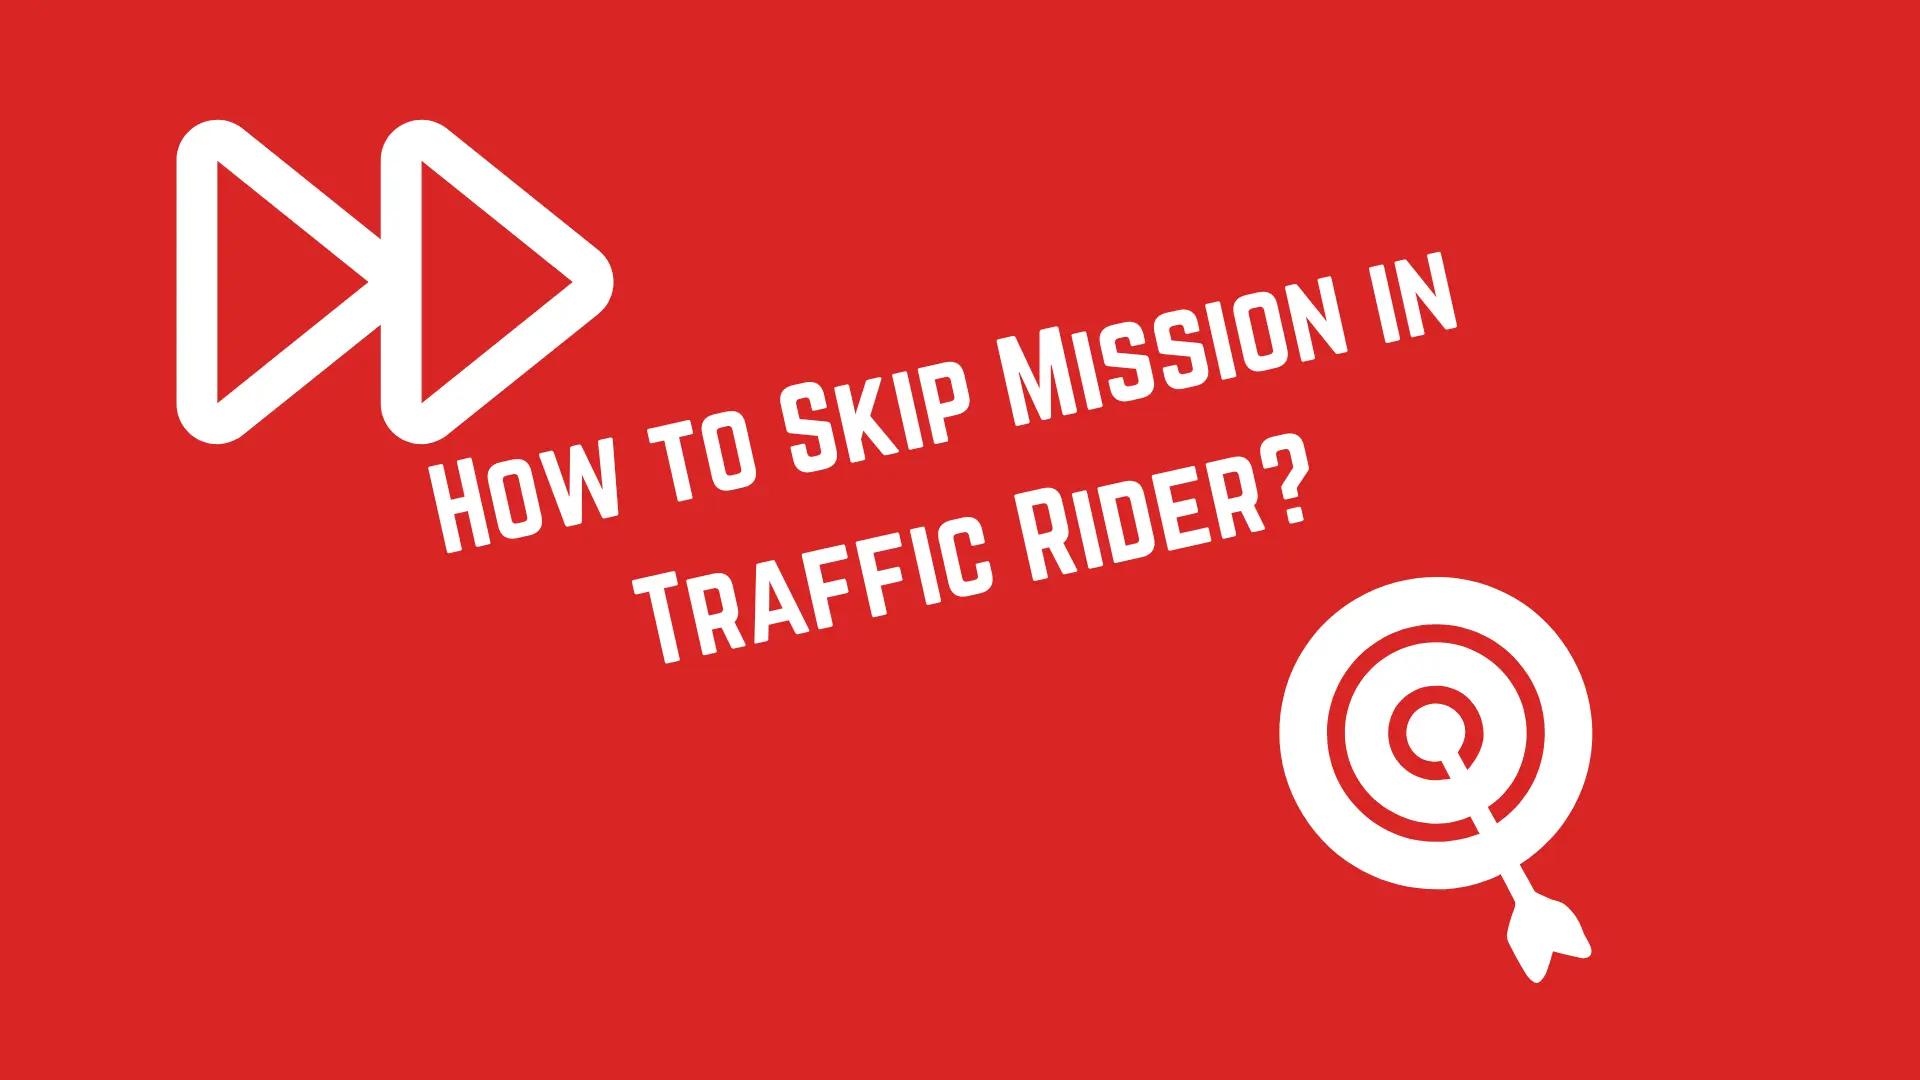 How to Skip Mission in Traffic Rider